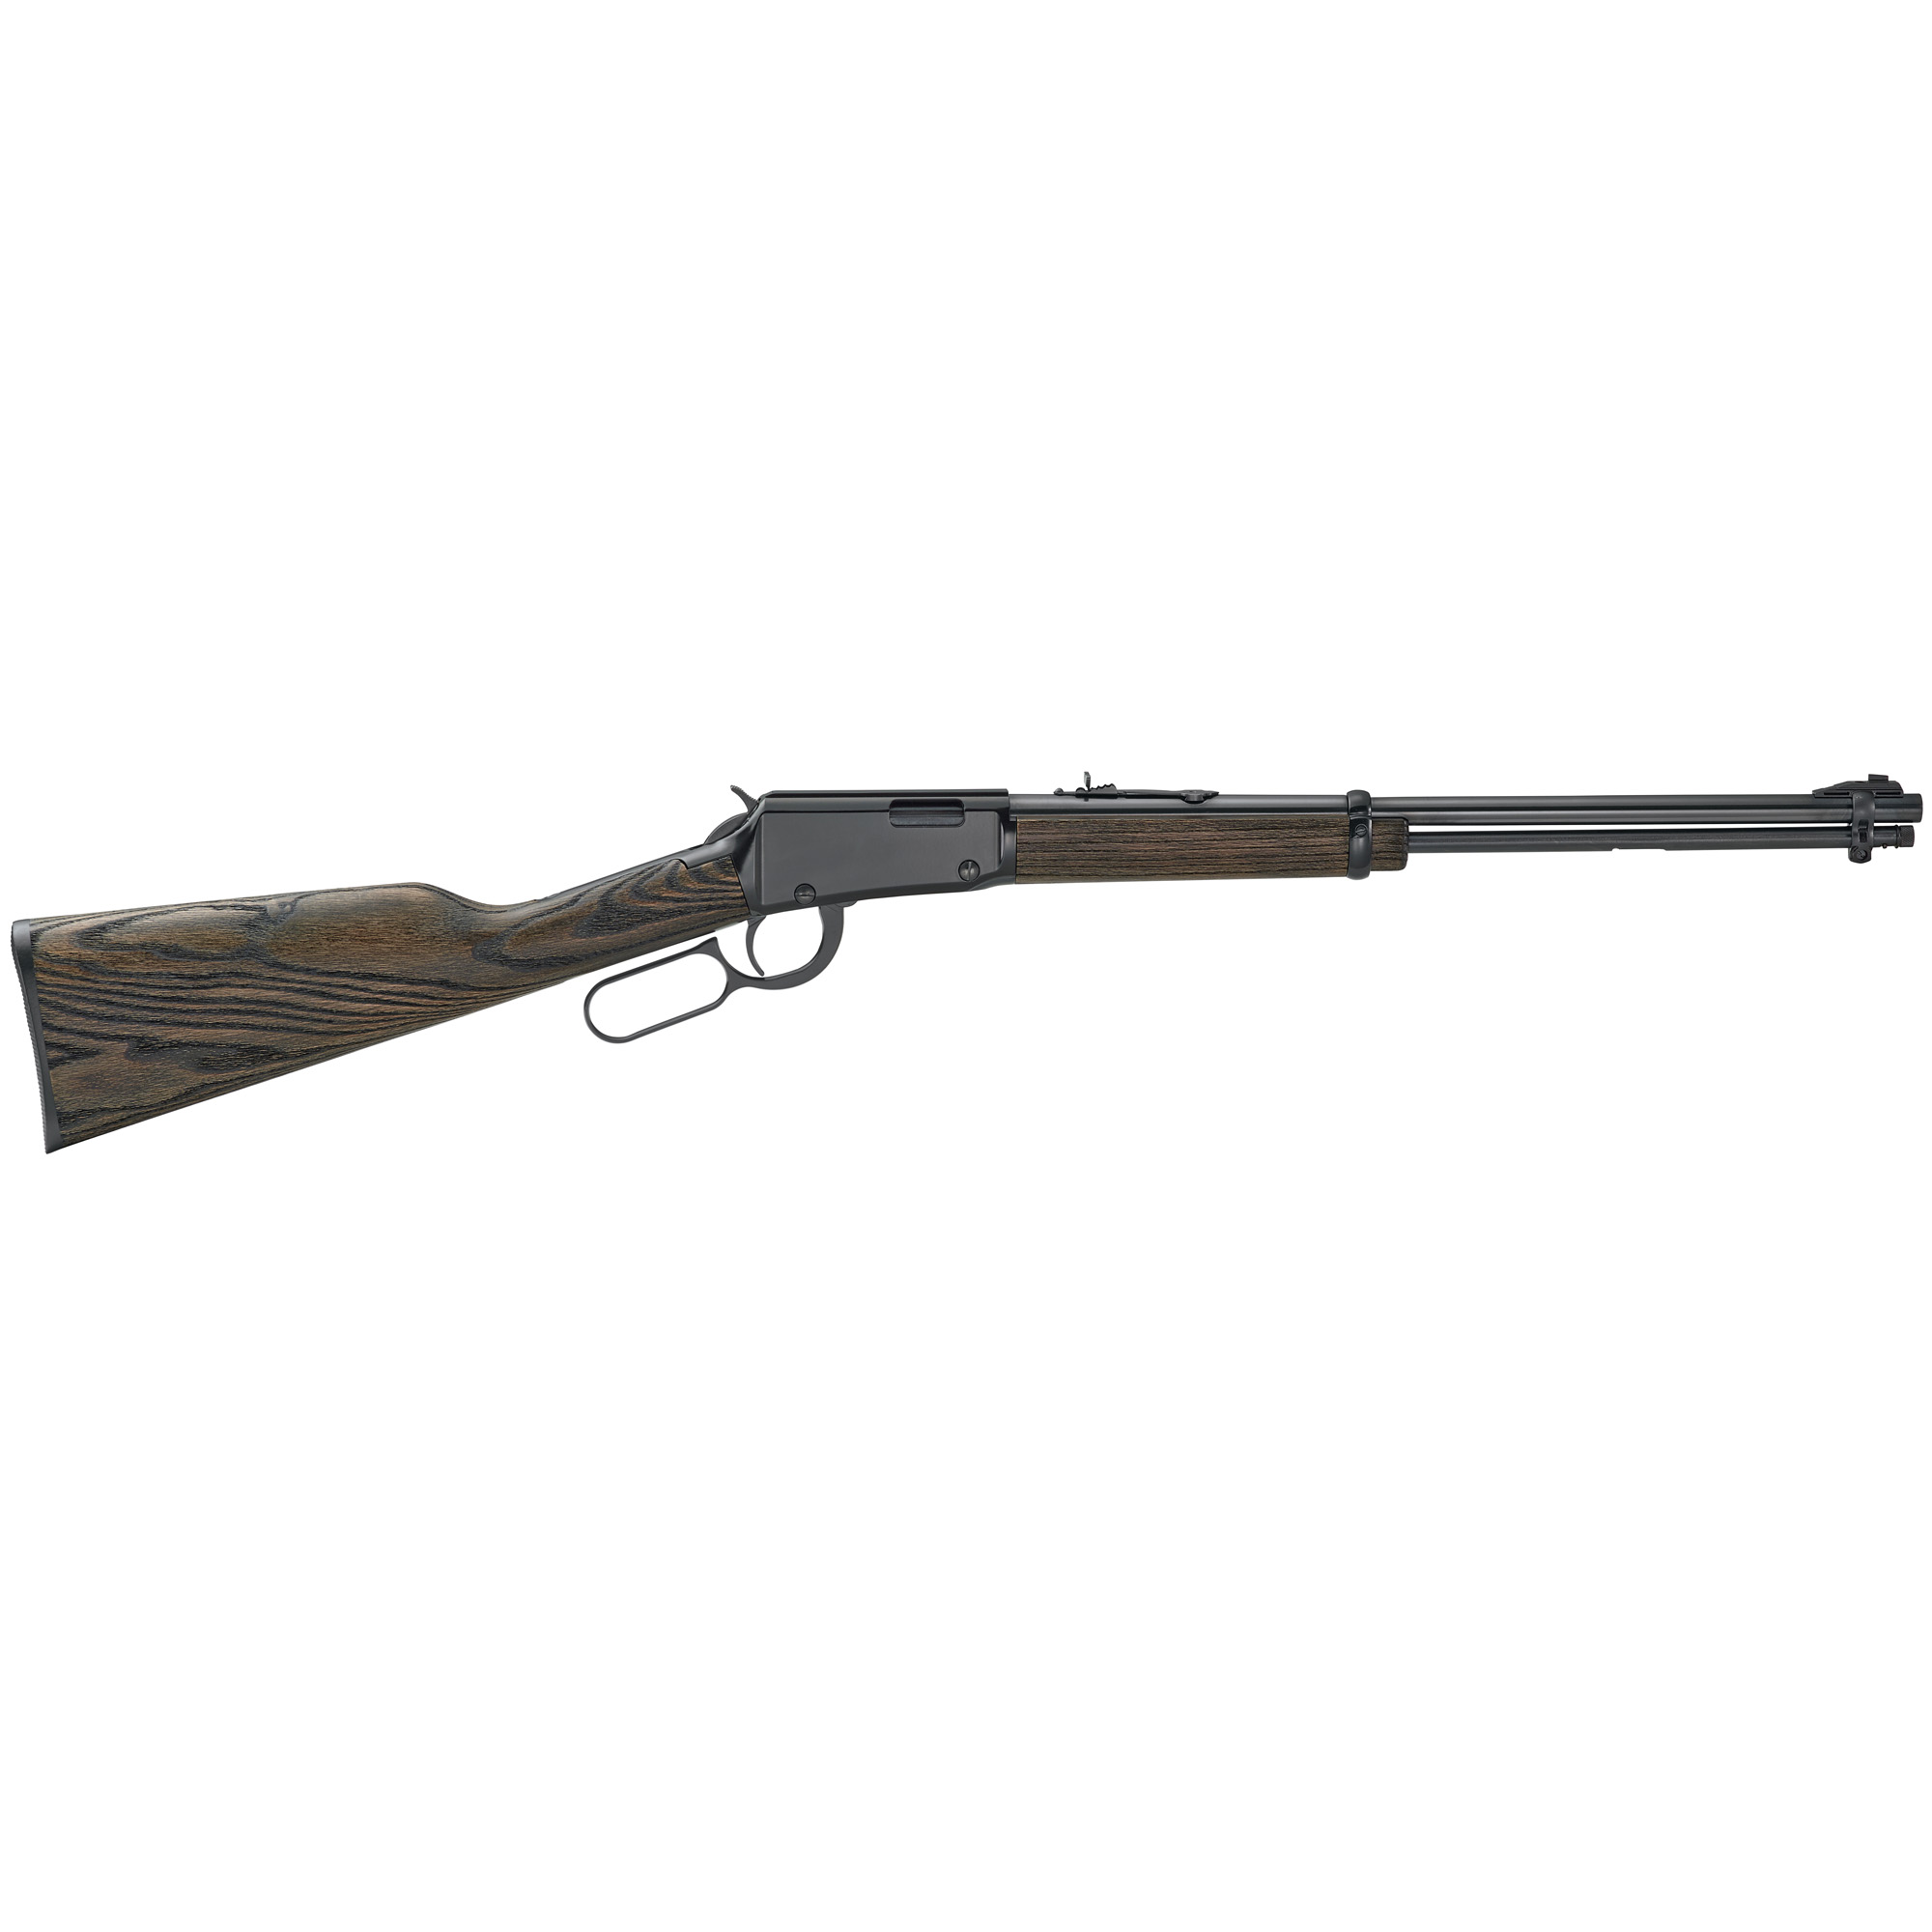 Henry Repeating Arms, Lever Action, 22 LR Shotshell, 18.25" Smoothbore Barrel, Blued Finish, Black Ash Stock, 15Rd, Adjustable Sights